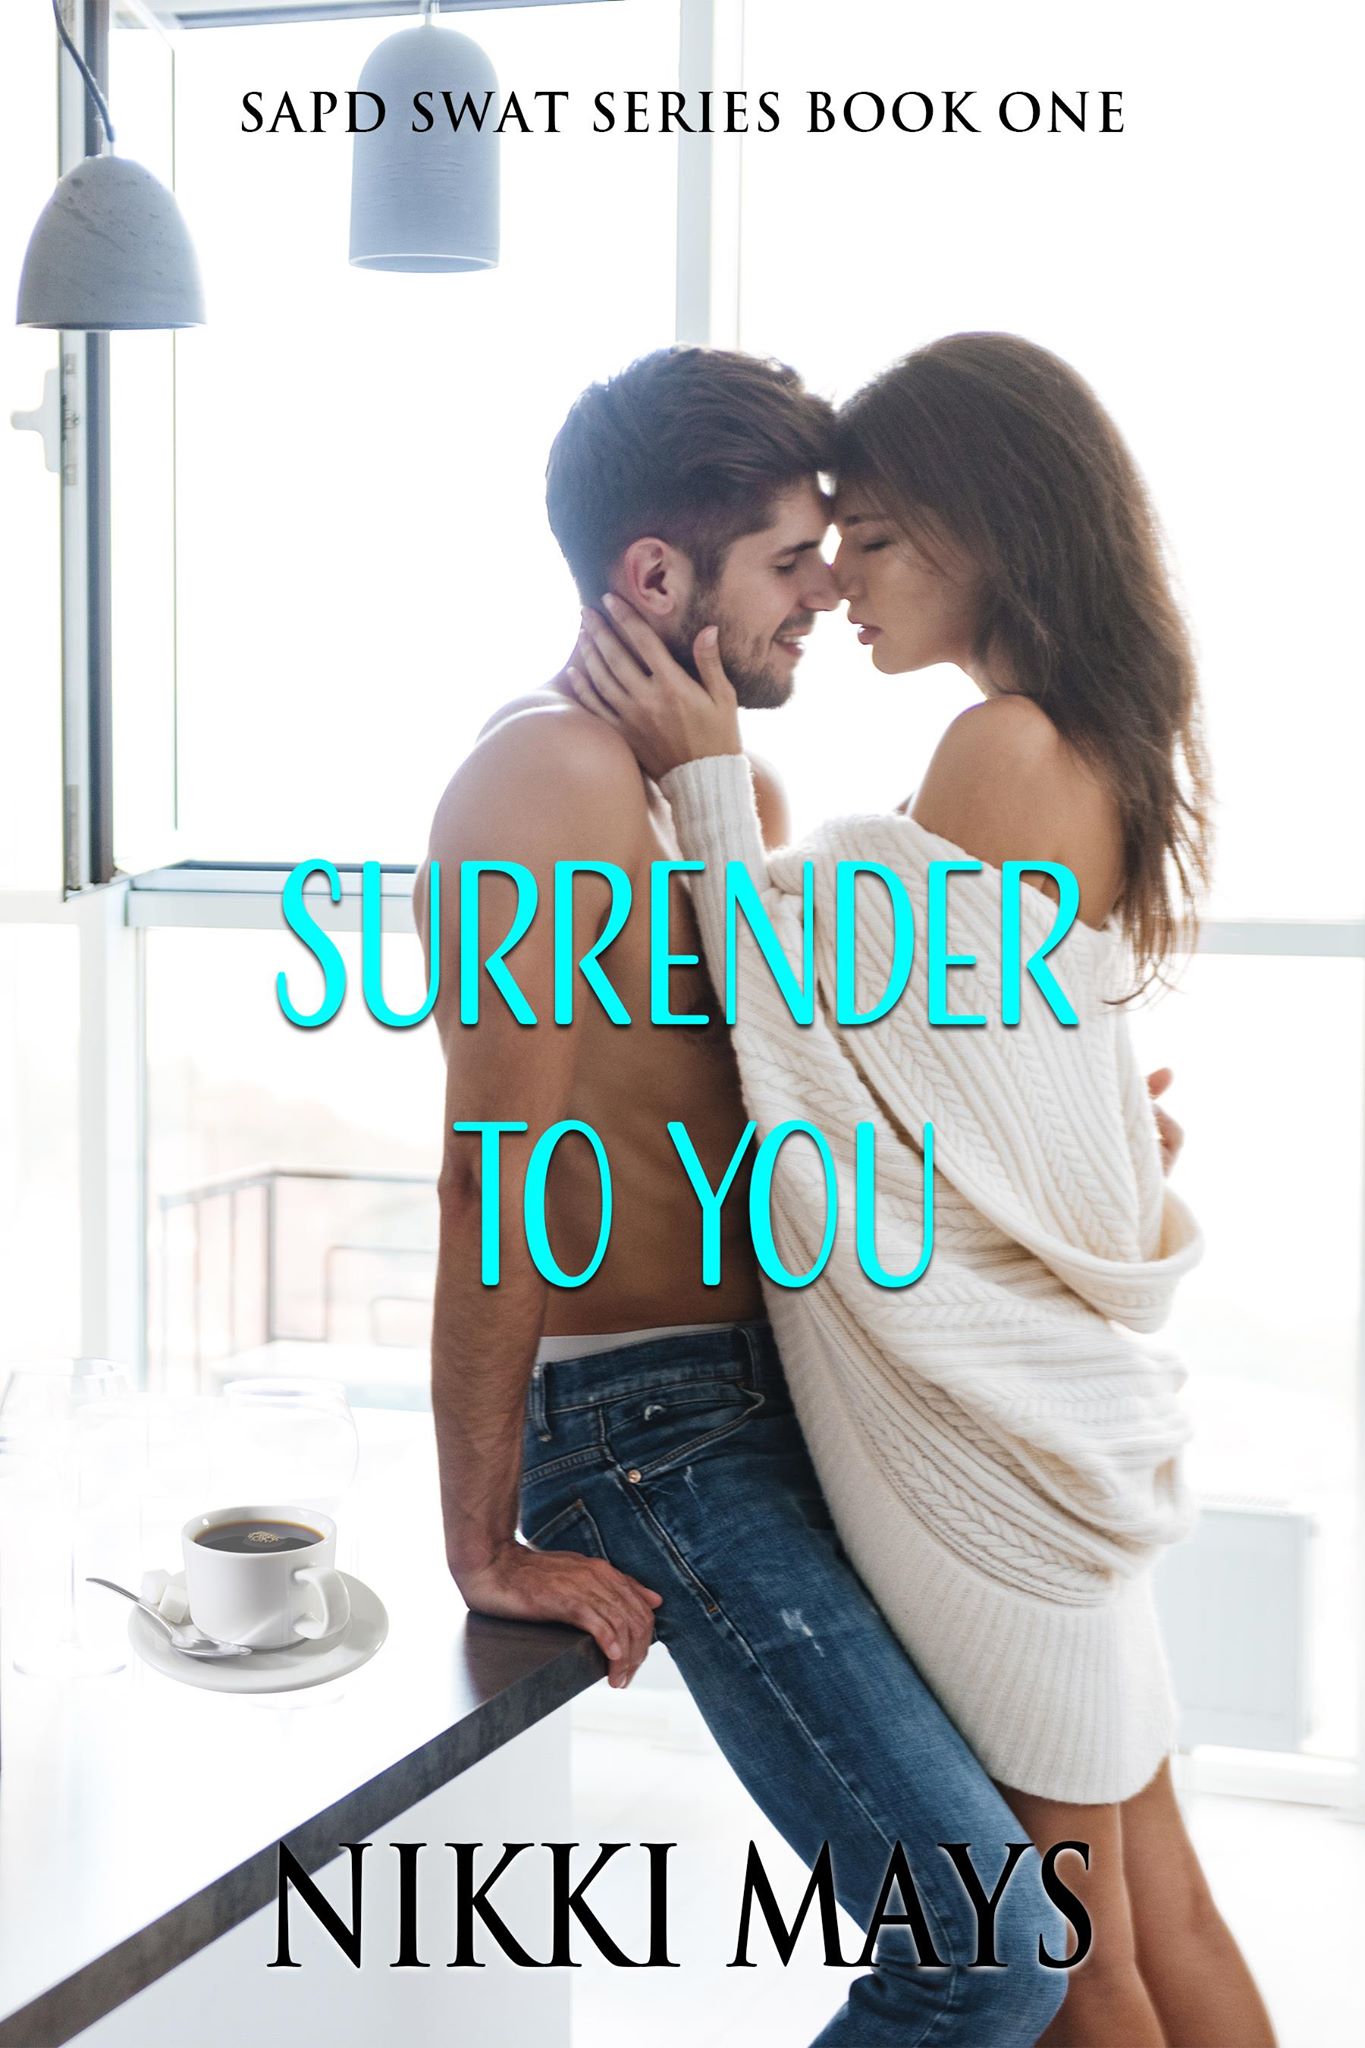 FREE: Surrender to You by Nikki Mays